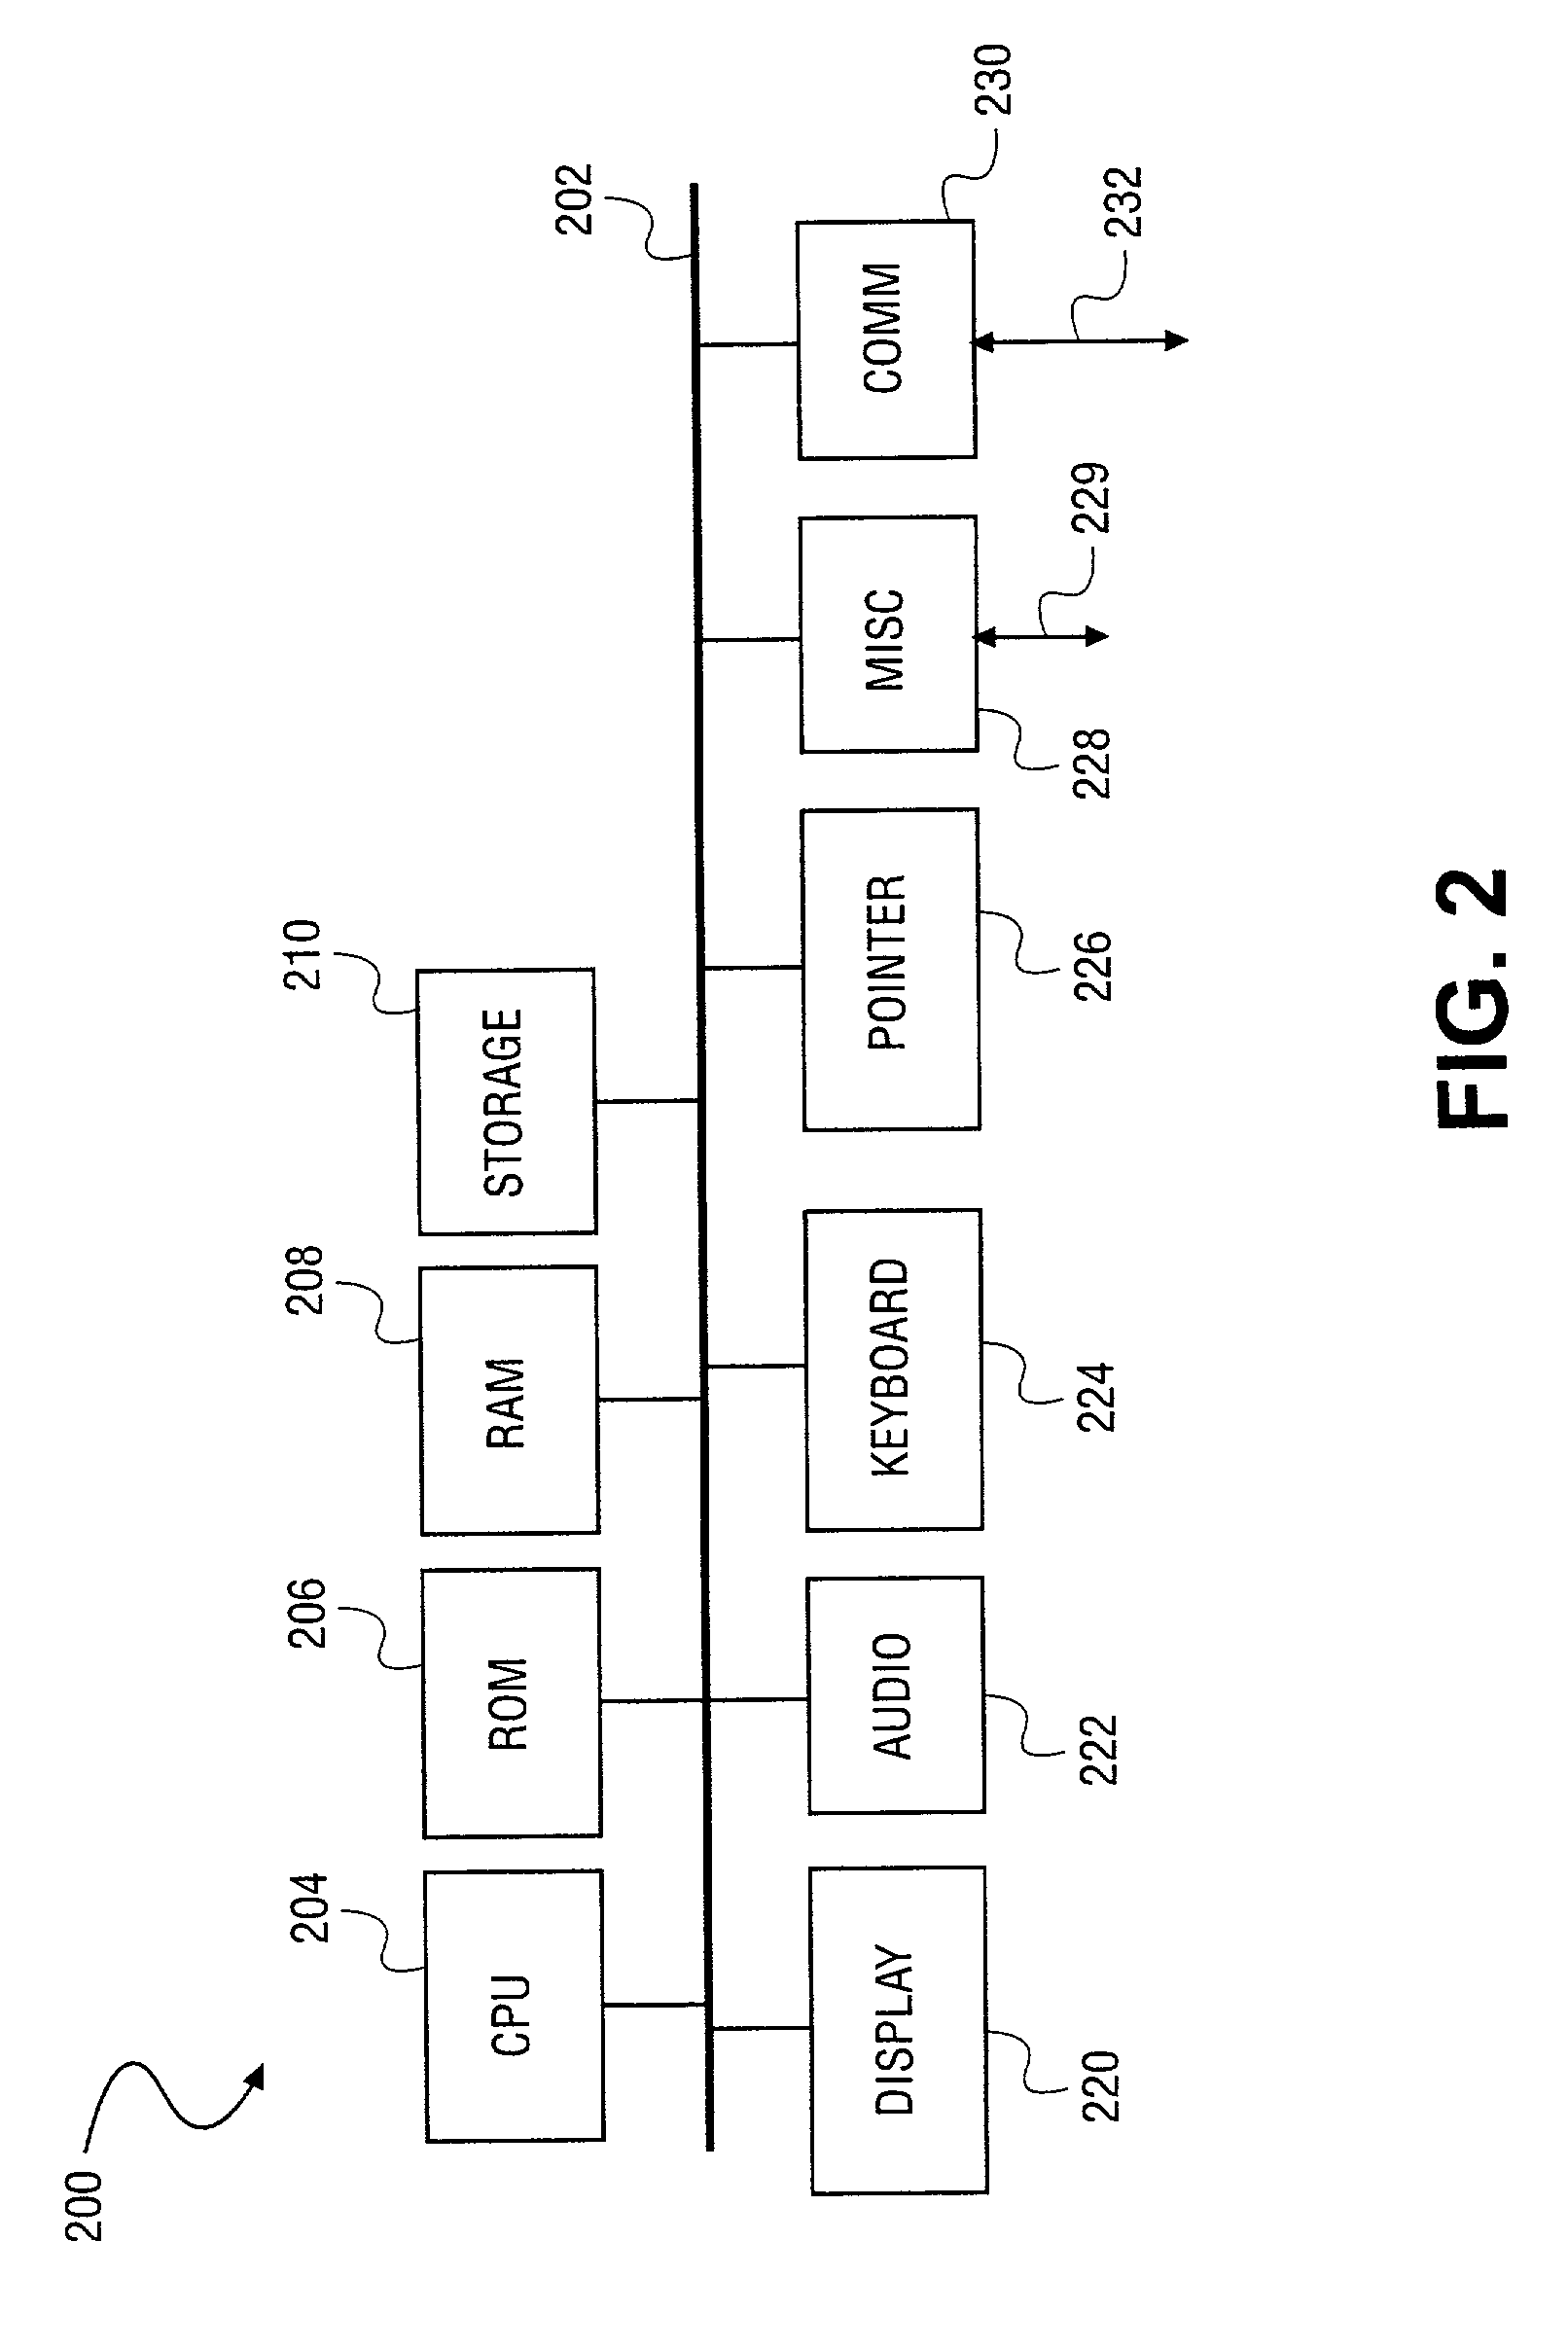 Apparatus and method for unilaterally loading a secure operating system within a multiprocessor environment